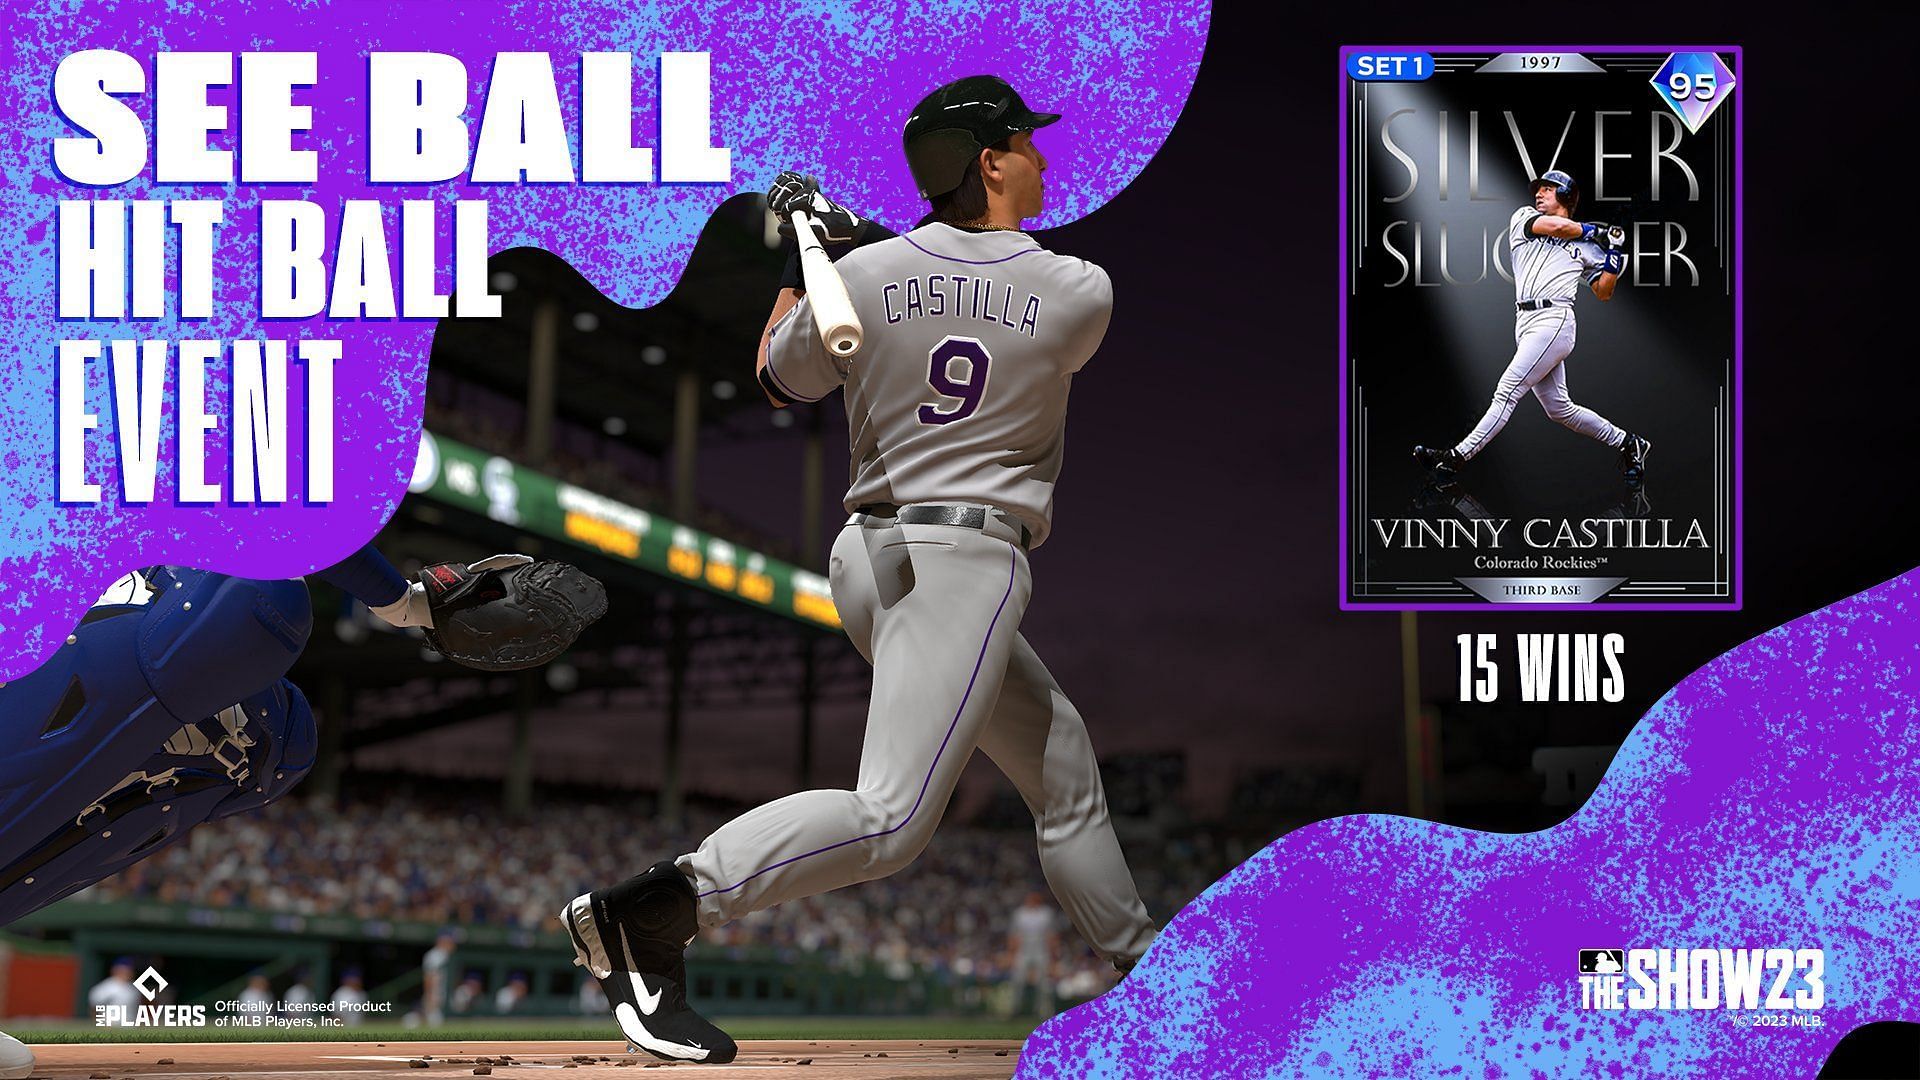 Reach 15 wins in See Ball, Hit Ball event to get Vinny Castilla for free in MLB The Show 23 (Image via San Diego Studio)